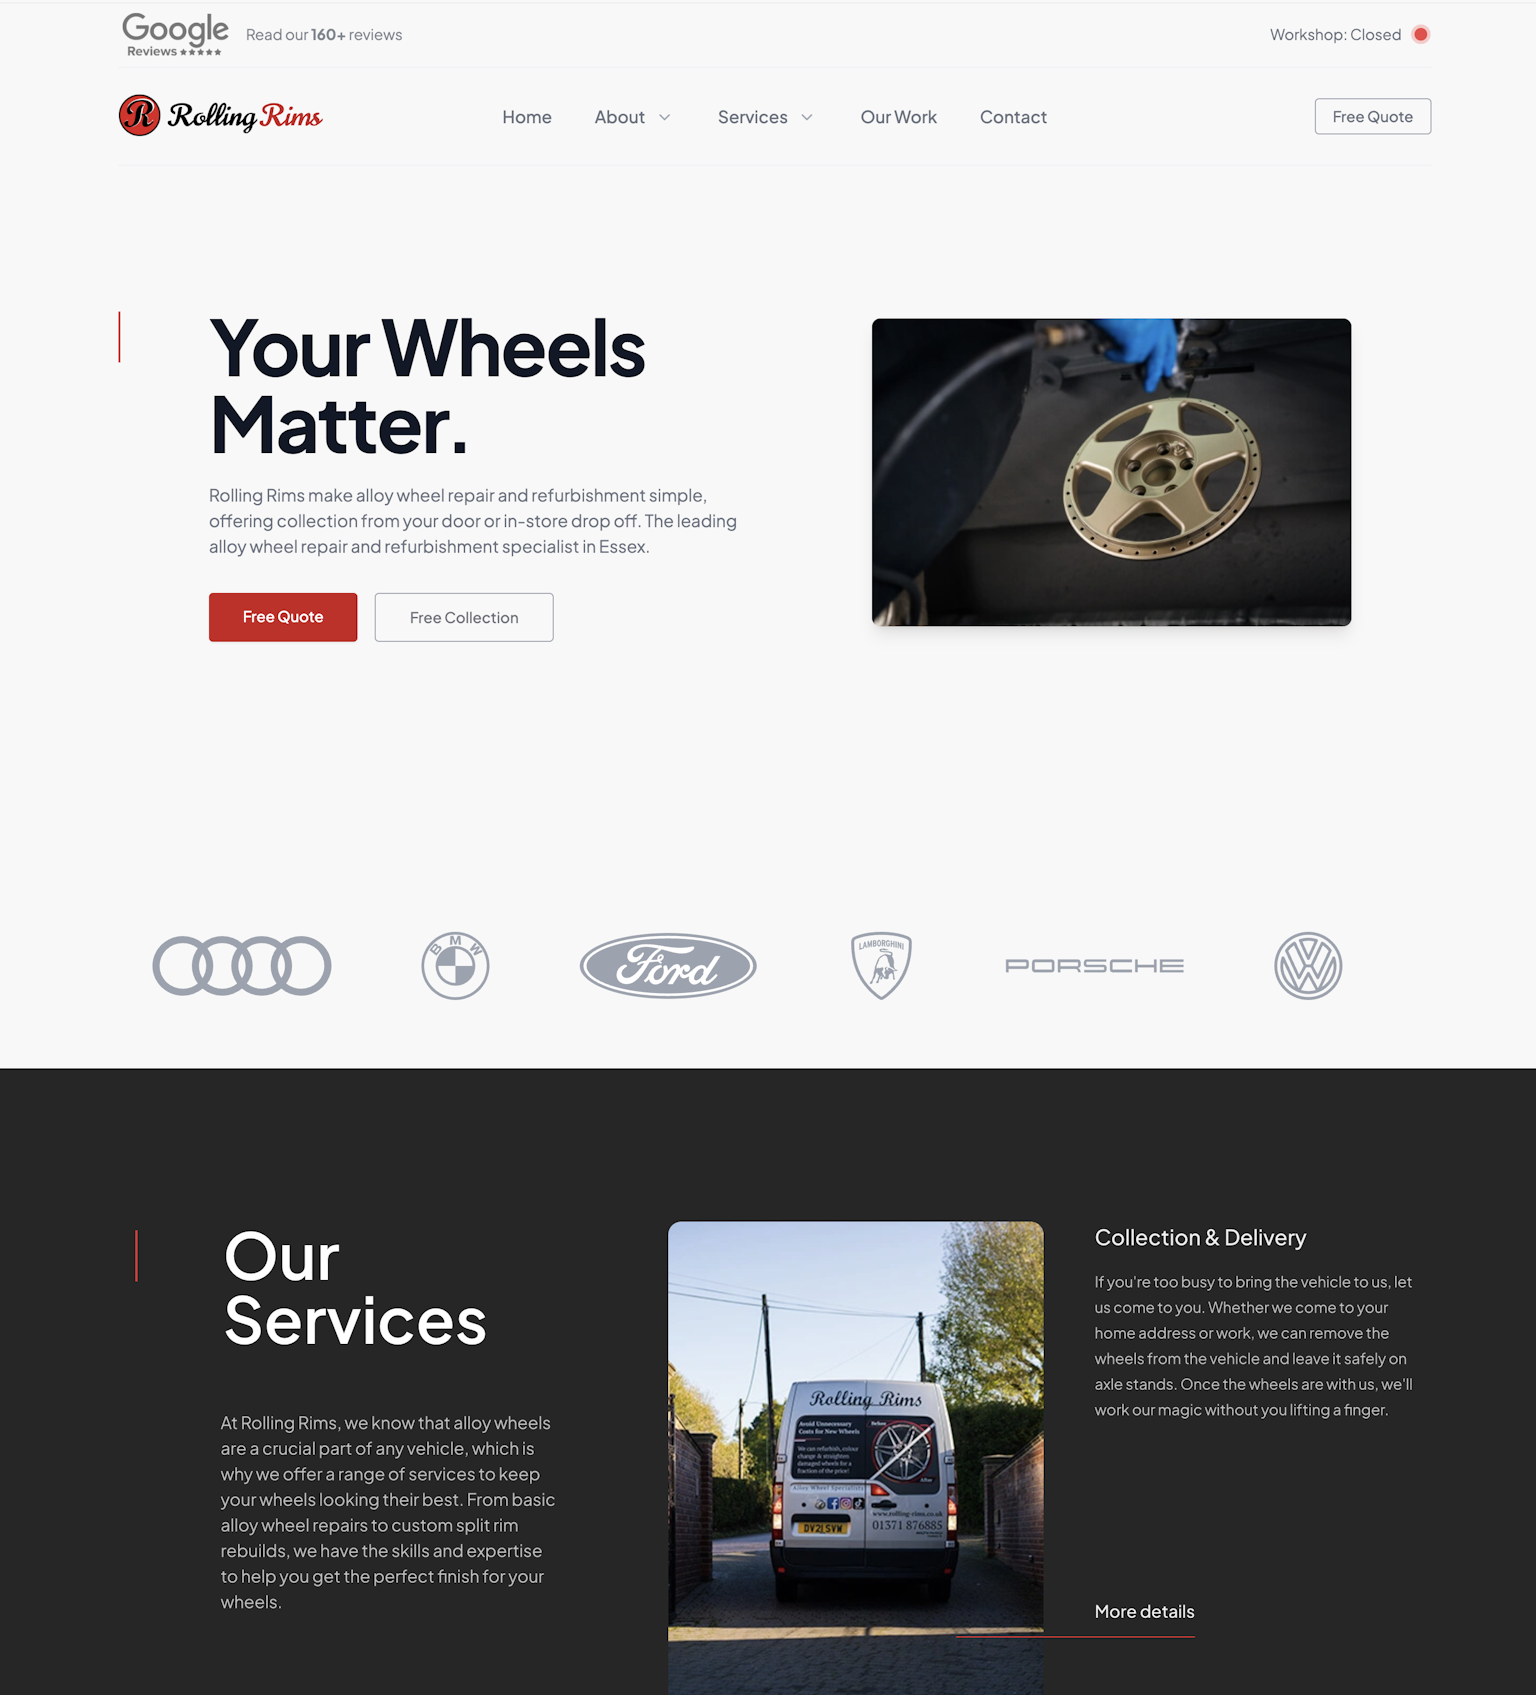 Screenshot of Rolling Rims website home page. It shows a hero section with a picture of a refurbished alloy wheel. It then has some car brands that they work with followed by a list of their services.